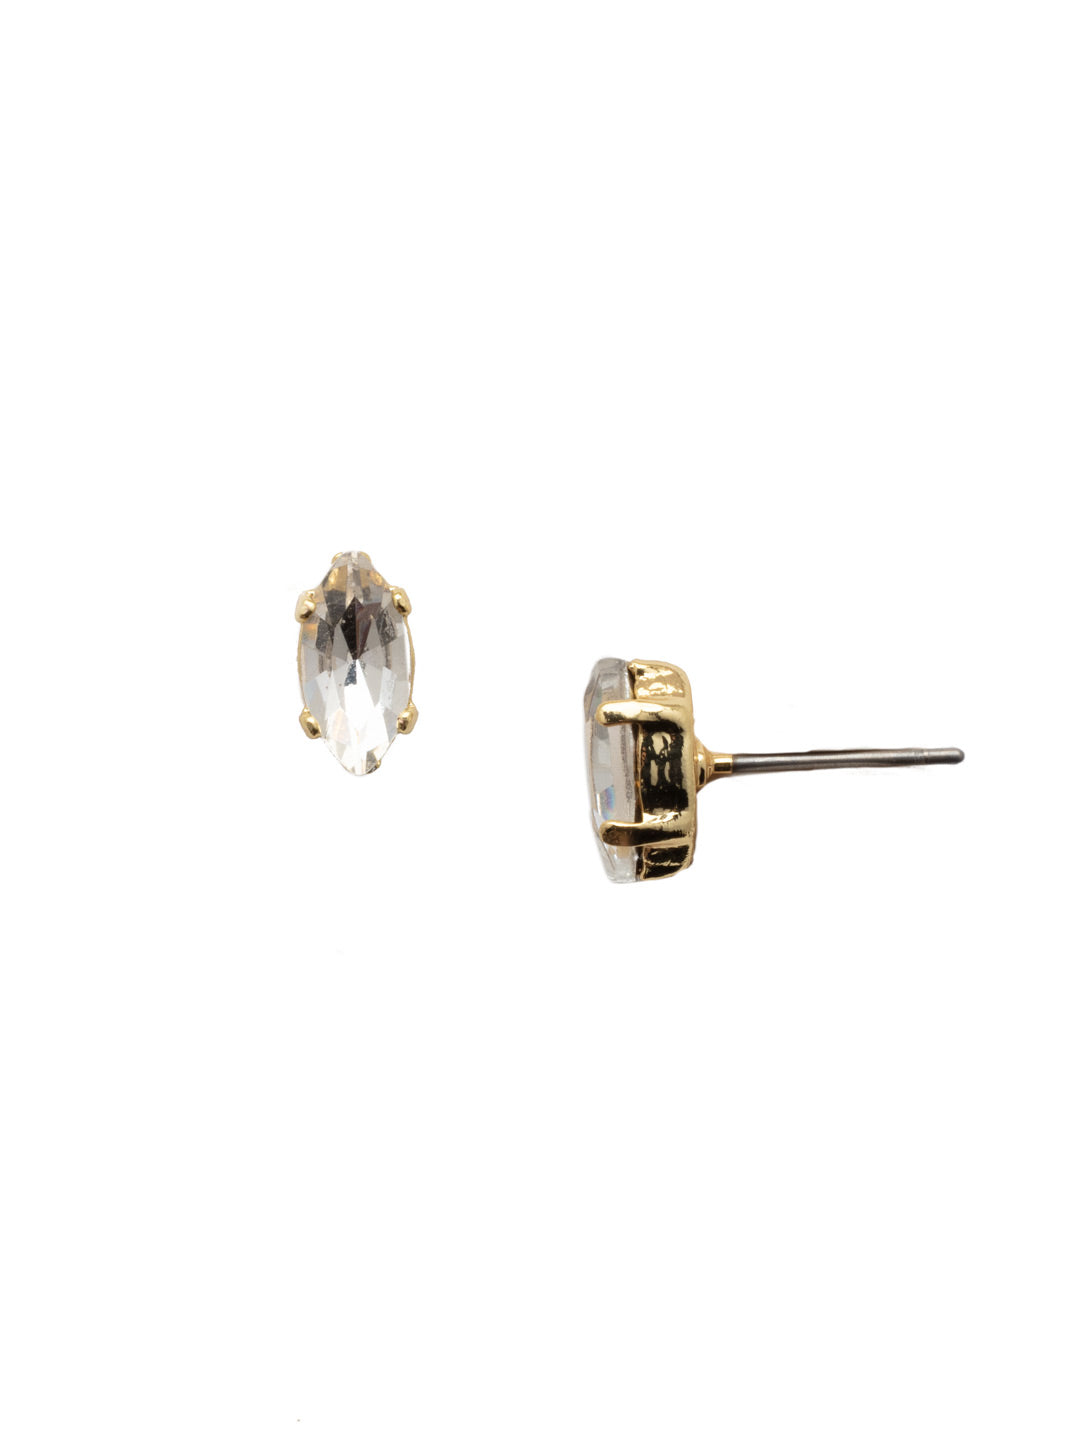 Clarissa Stud Earrings - EEP4BGCRY - <p>The Clarissa Stud Earring is for the lover of classics with a twist. Simple sparkling crystals get an oomph from the navette shape. From Sorrelli's Crystal collection in our Bright Gold-tone finish.</p>